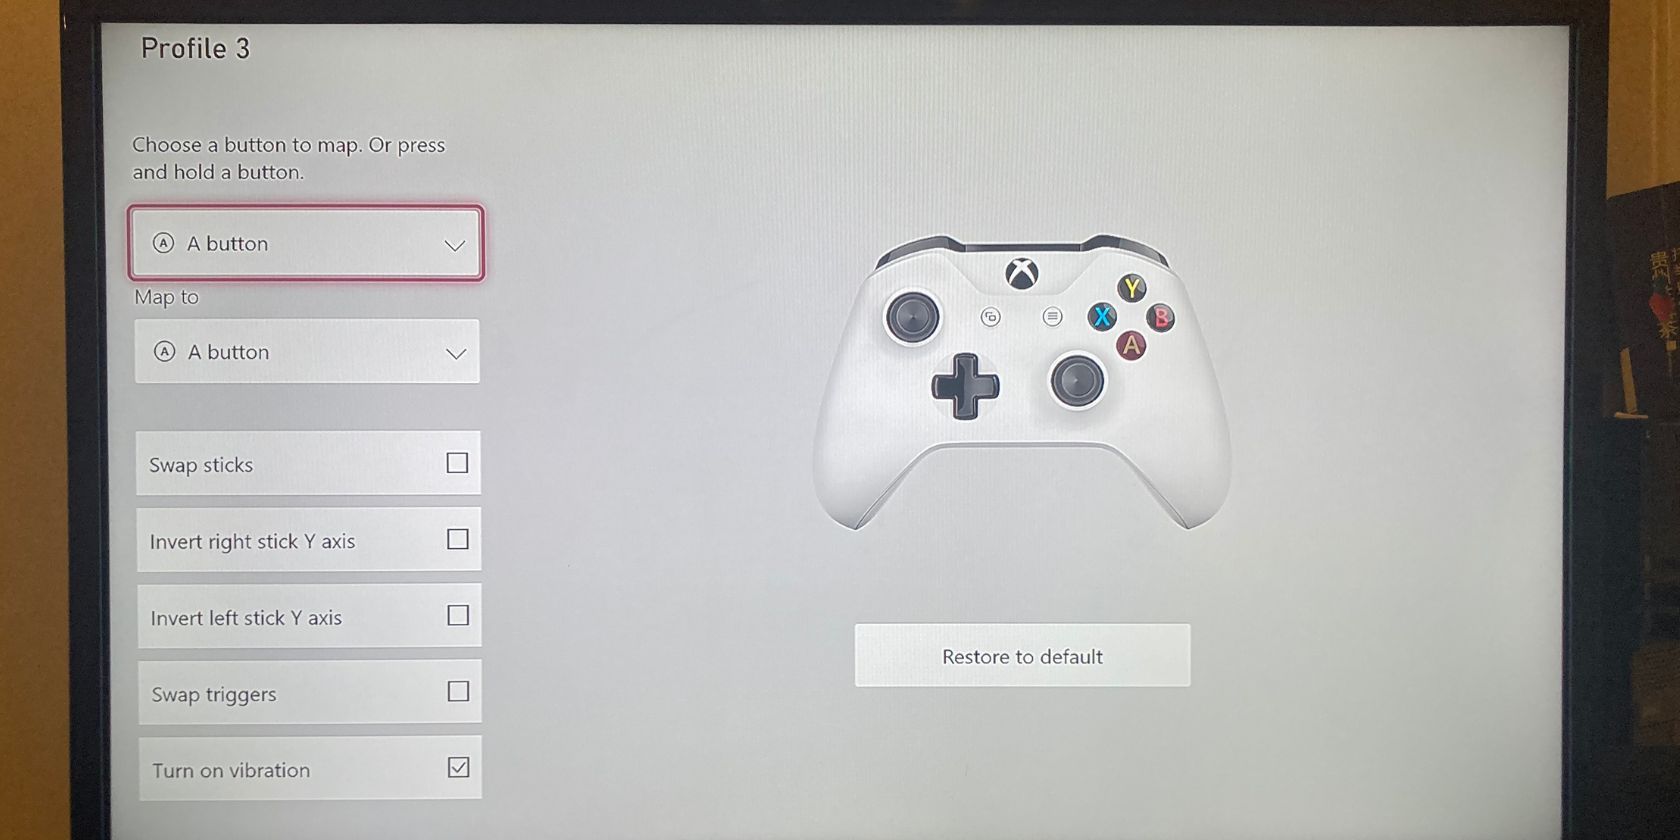 The button mapping page for the controller on the Xbox One Xbox Accessories app